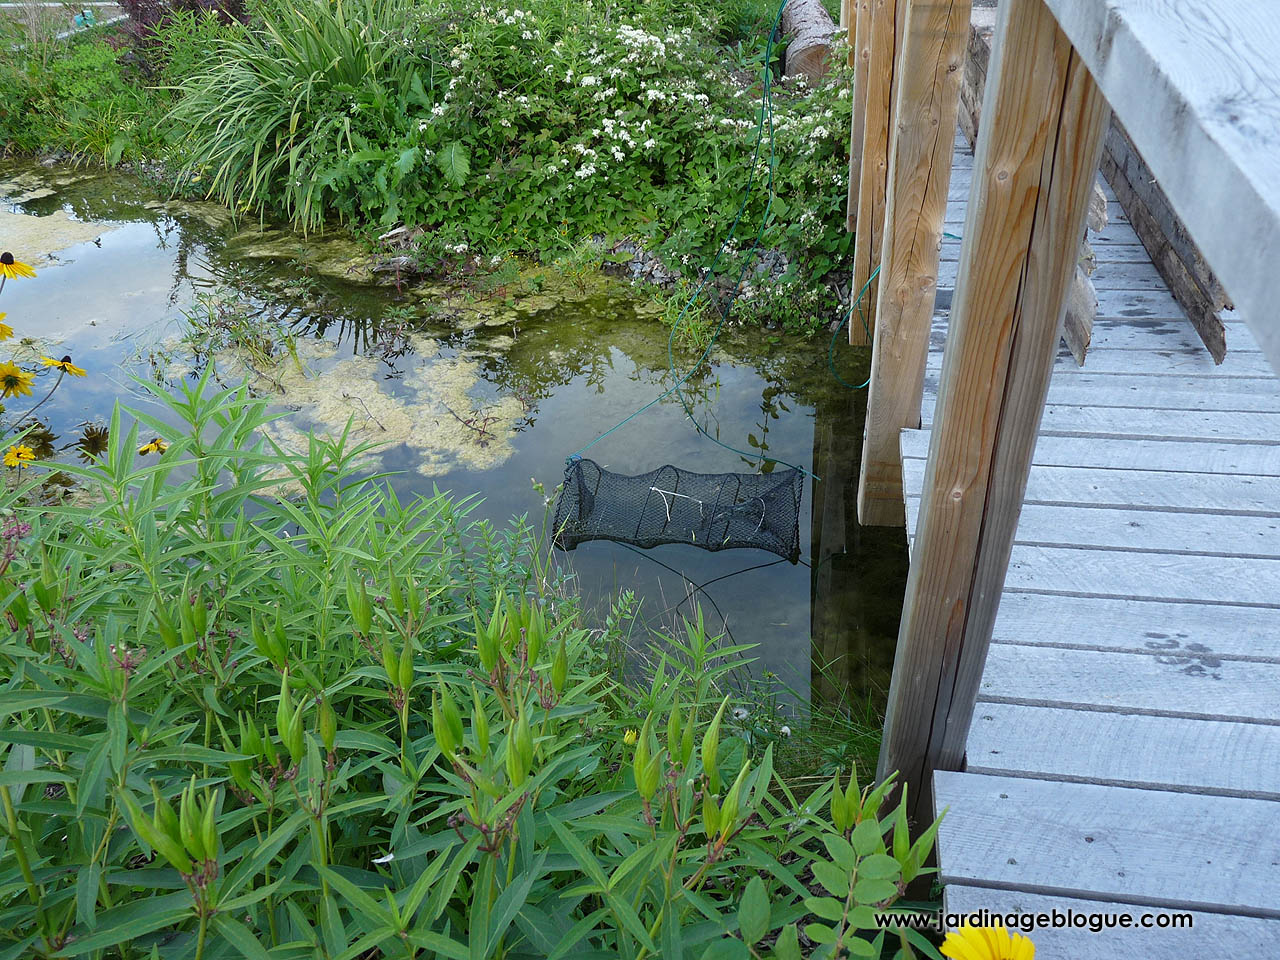 Best place to set the trap for catching small fish in your pond